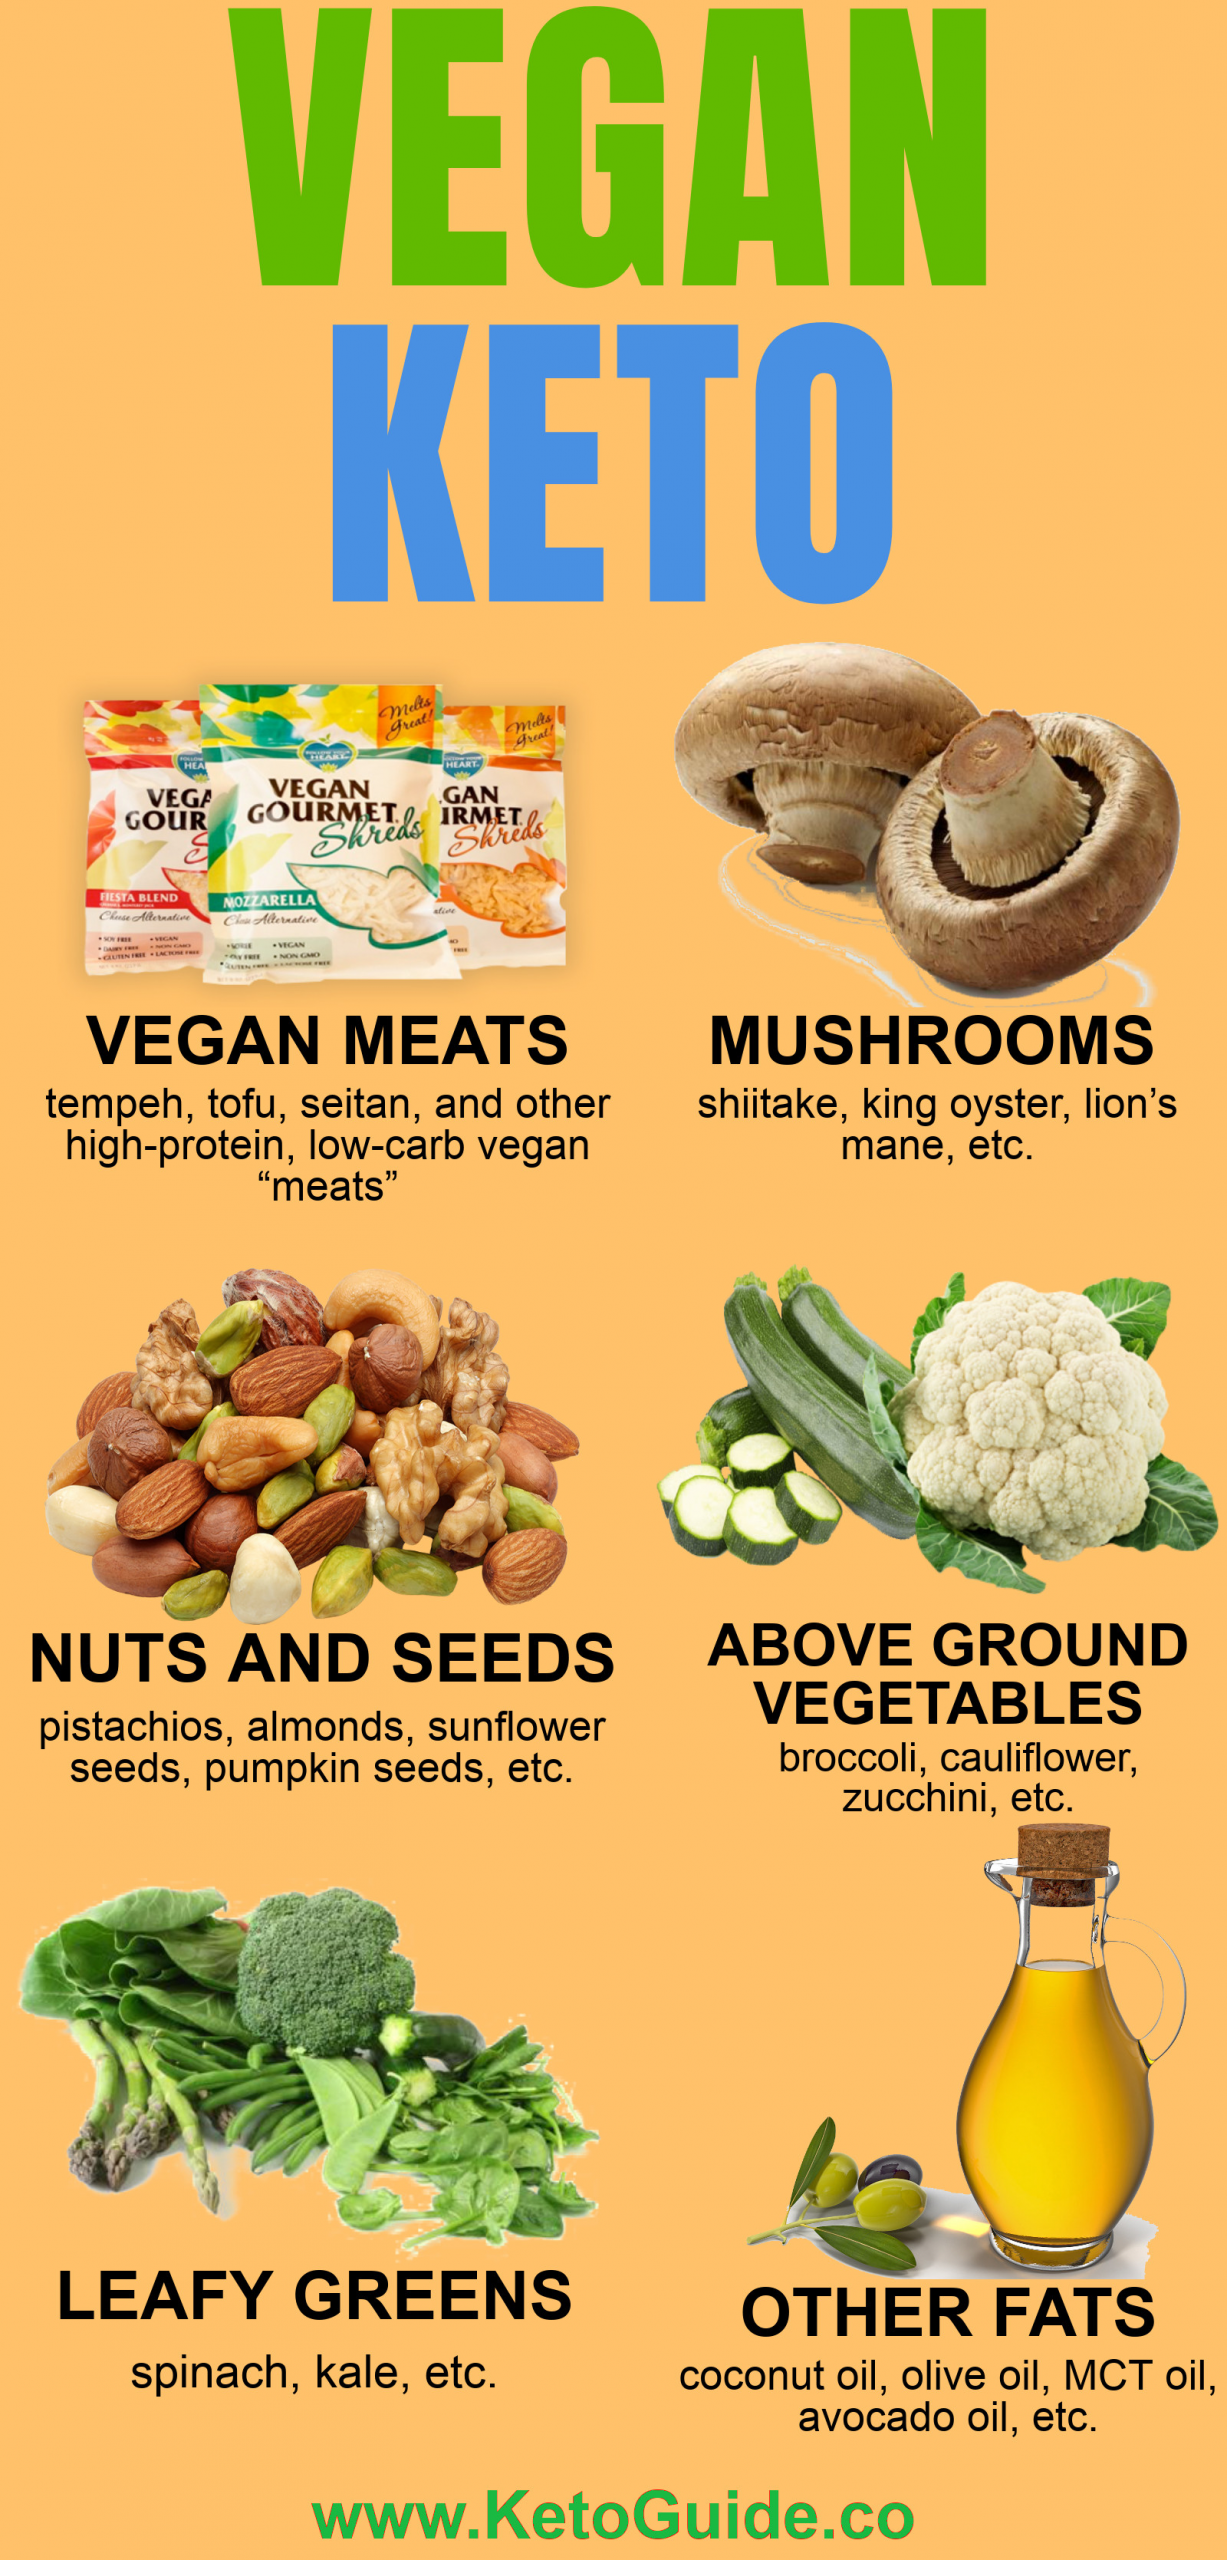 Vegan Keto Food List
 The Ultimate food list of the vegan keto t and also